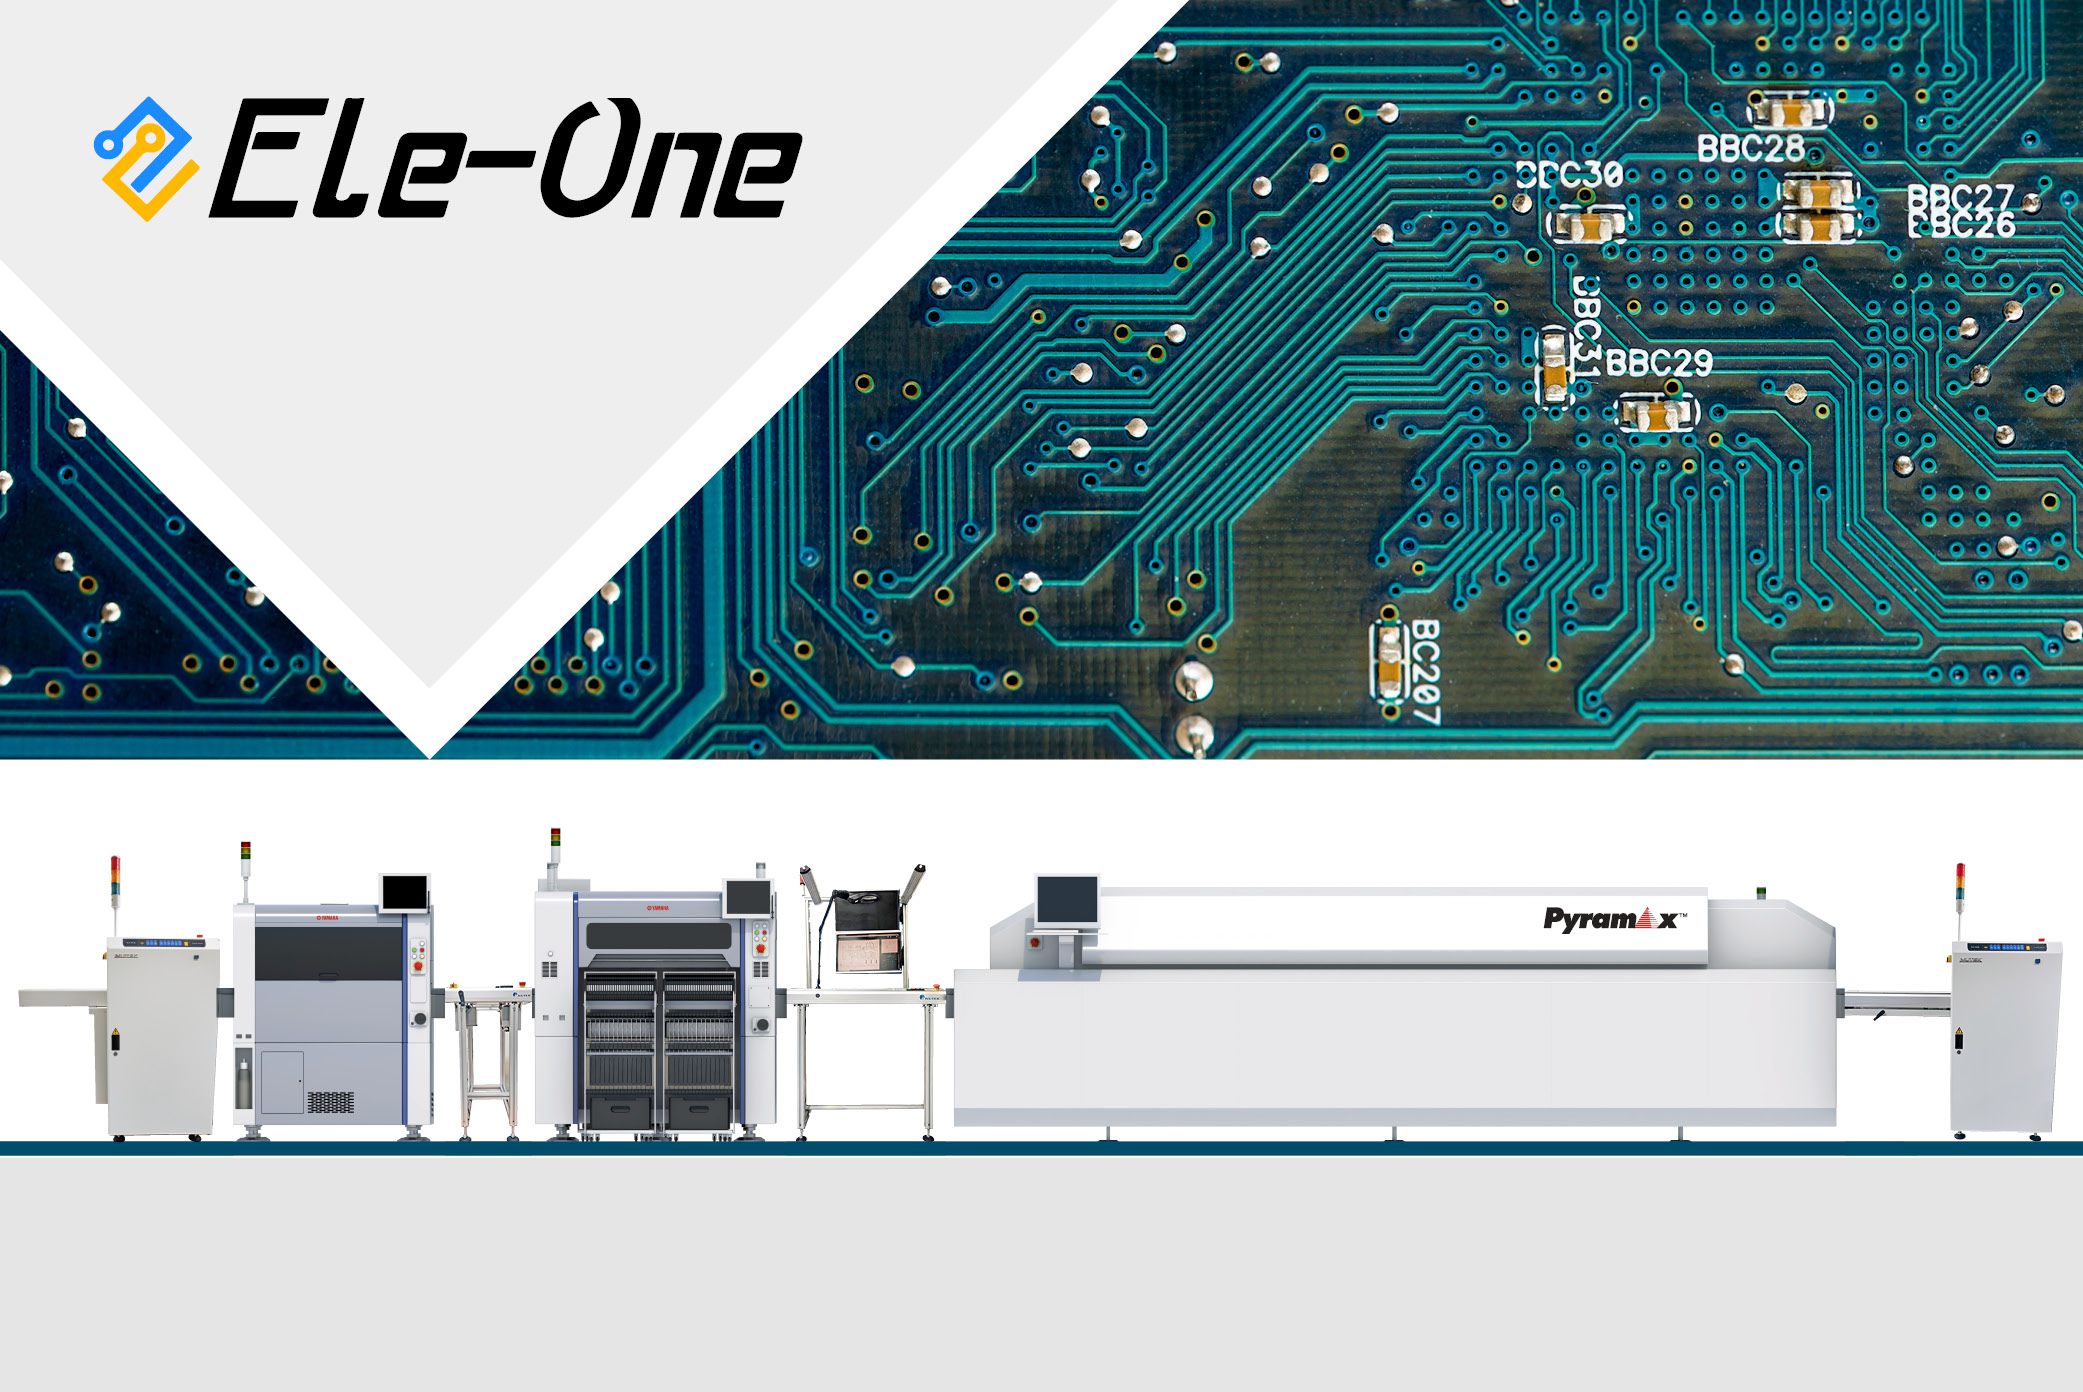 Ele-one’s new complete SMT line investment